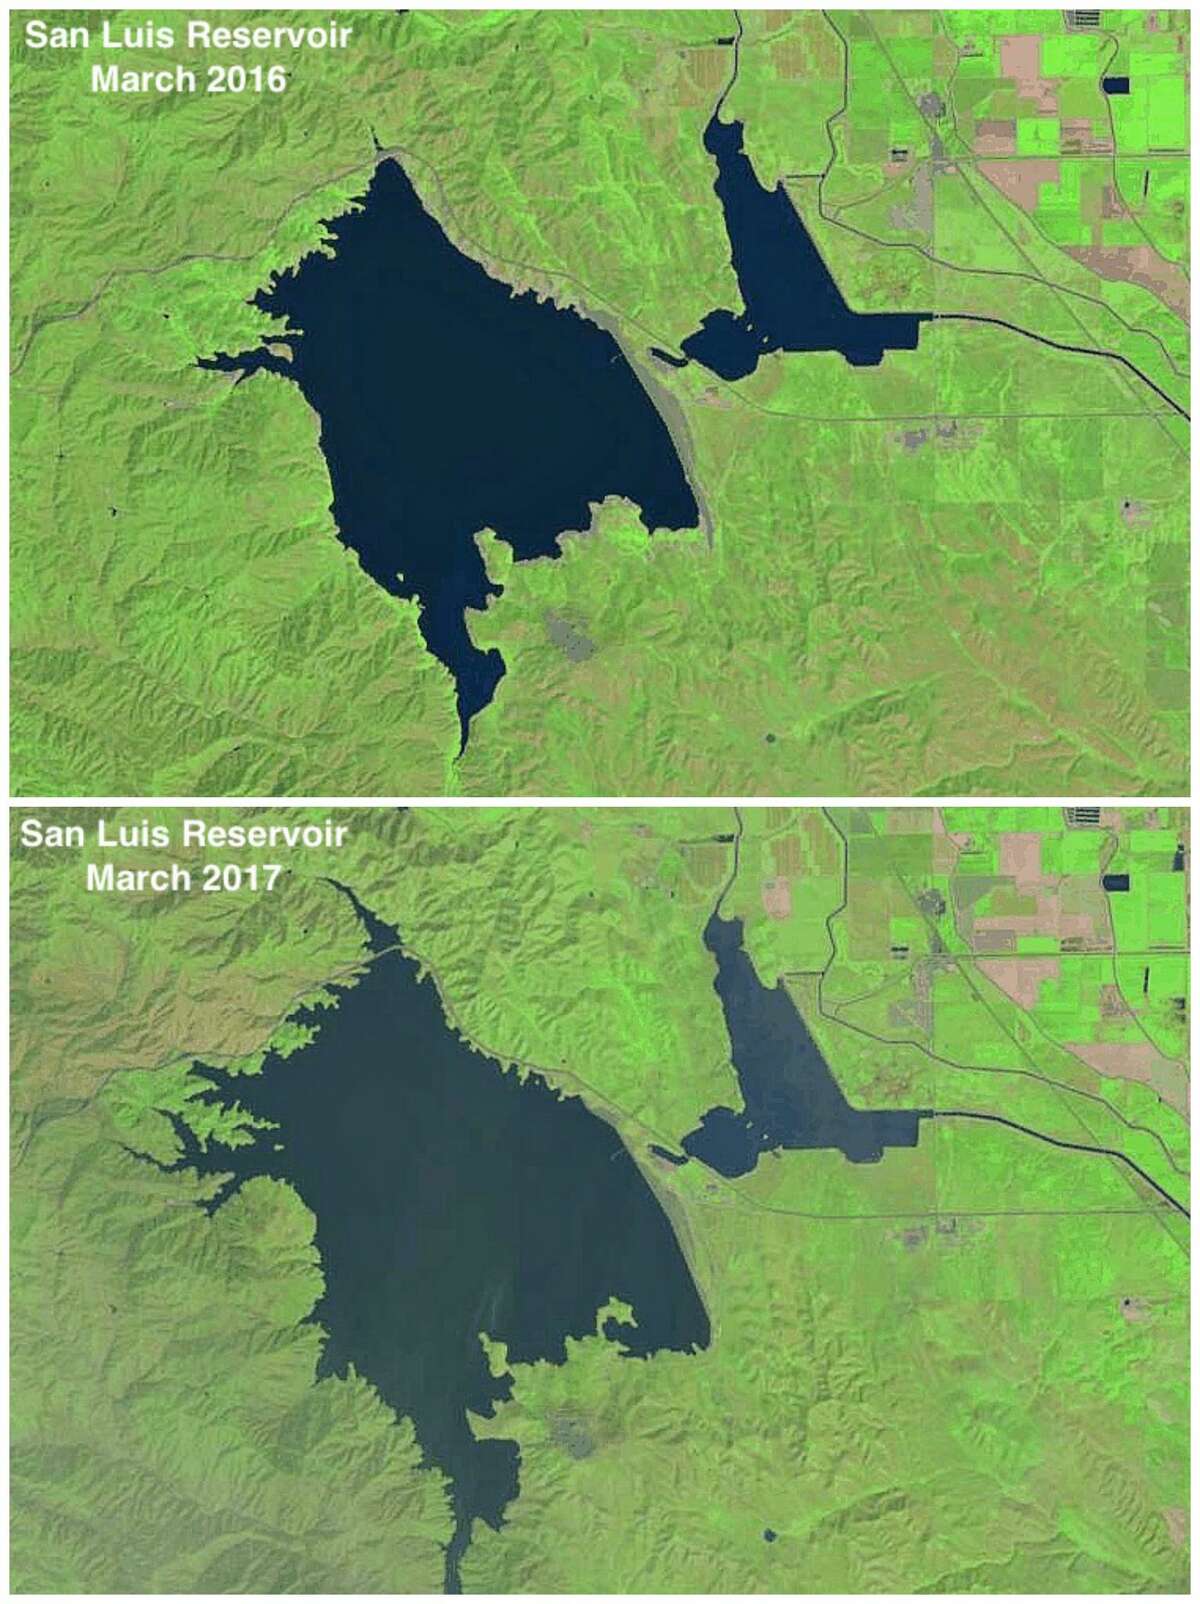 See California reservoirs fill up in these beforeandafter images